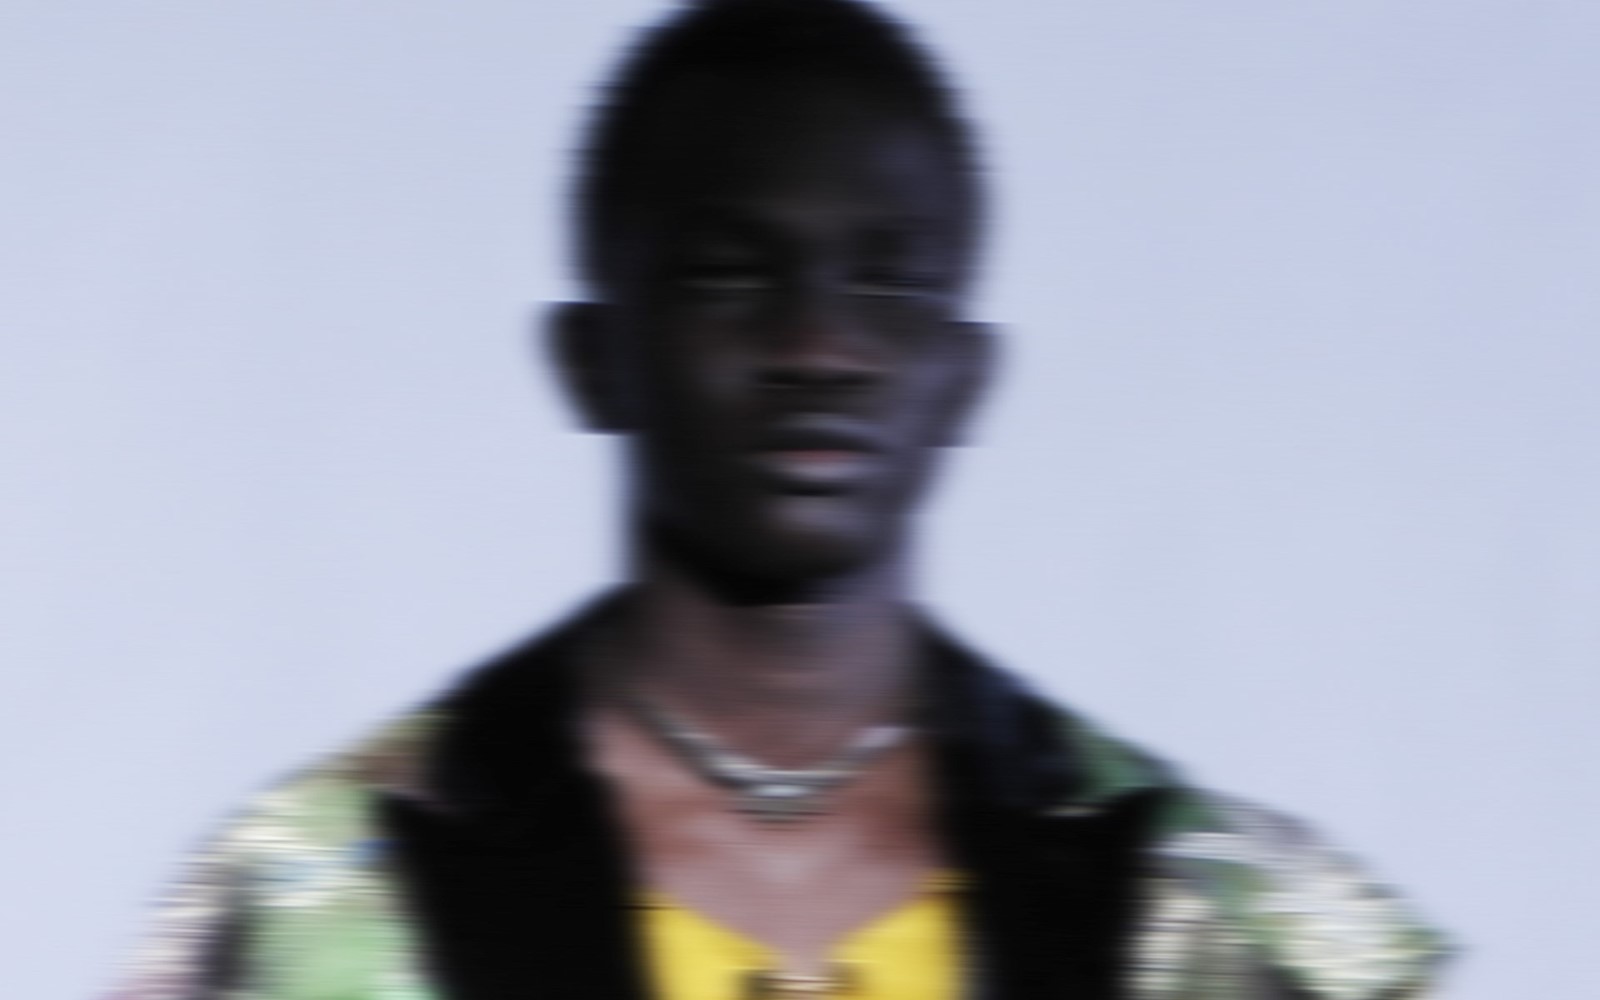 https://images-prod.anothermag.com/1600/azure/another-prod/400/7/407524.jpeg